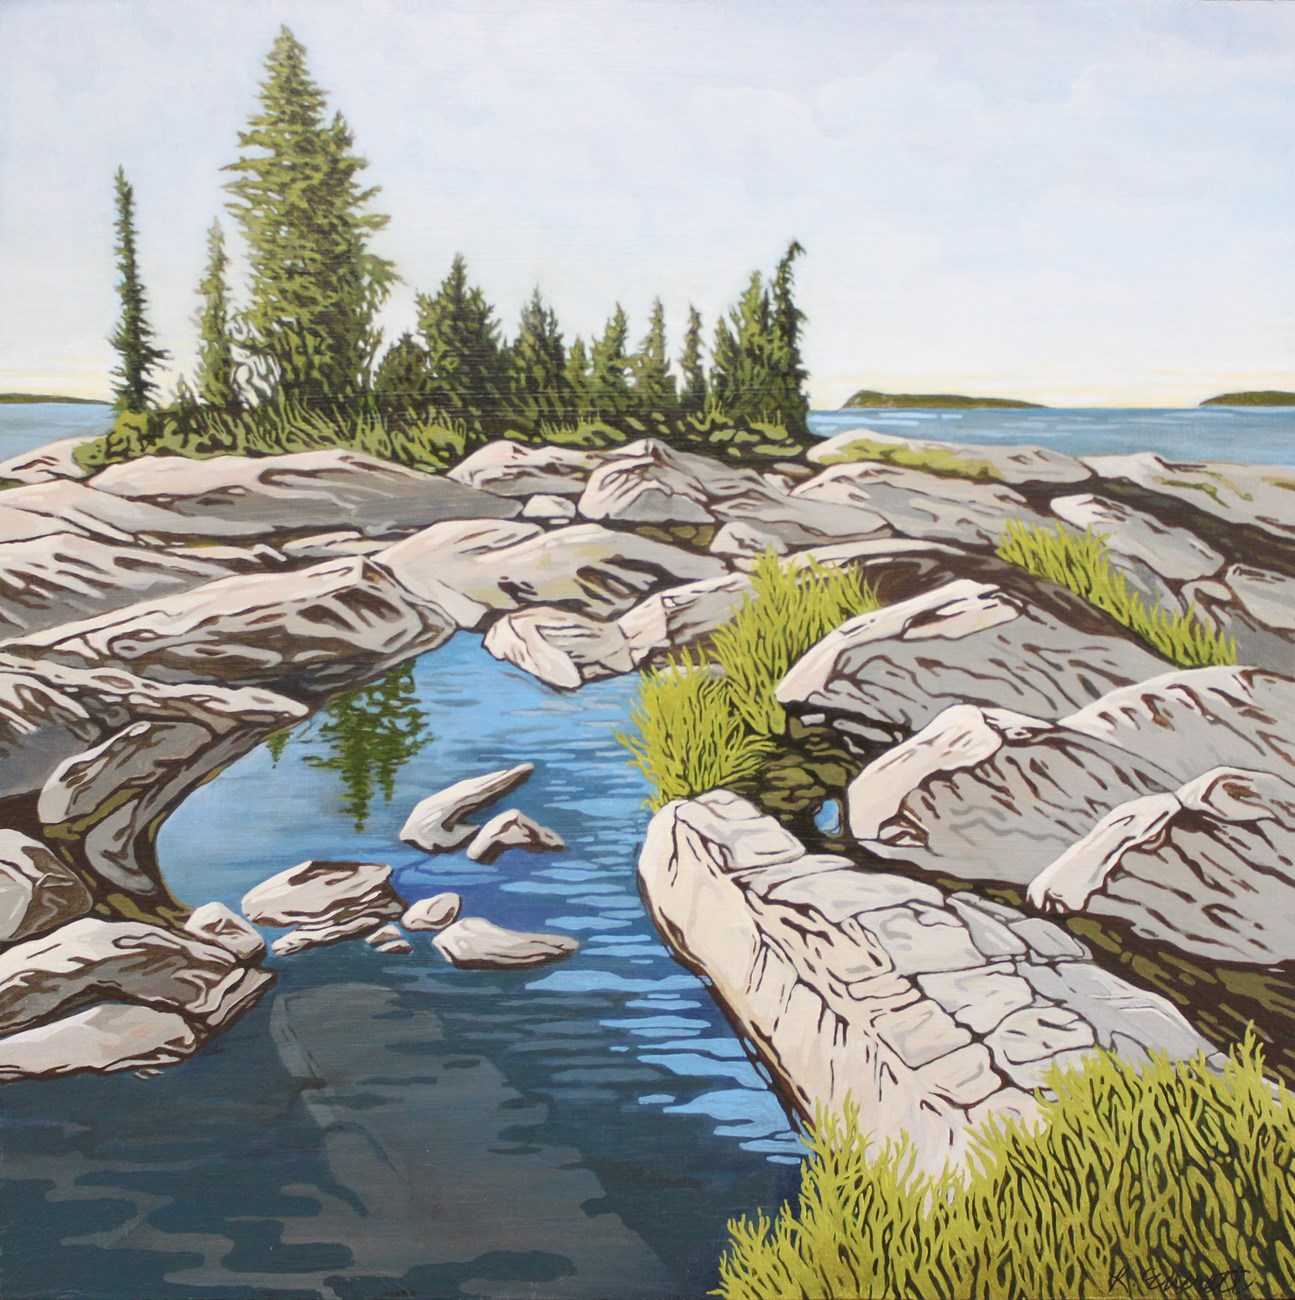 painting of rock outcroppings with trees and grasses growing atop and blue water pooling between, Lake Superior and islands in the periphery